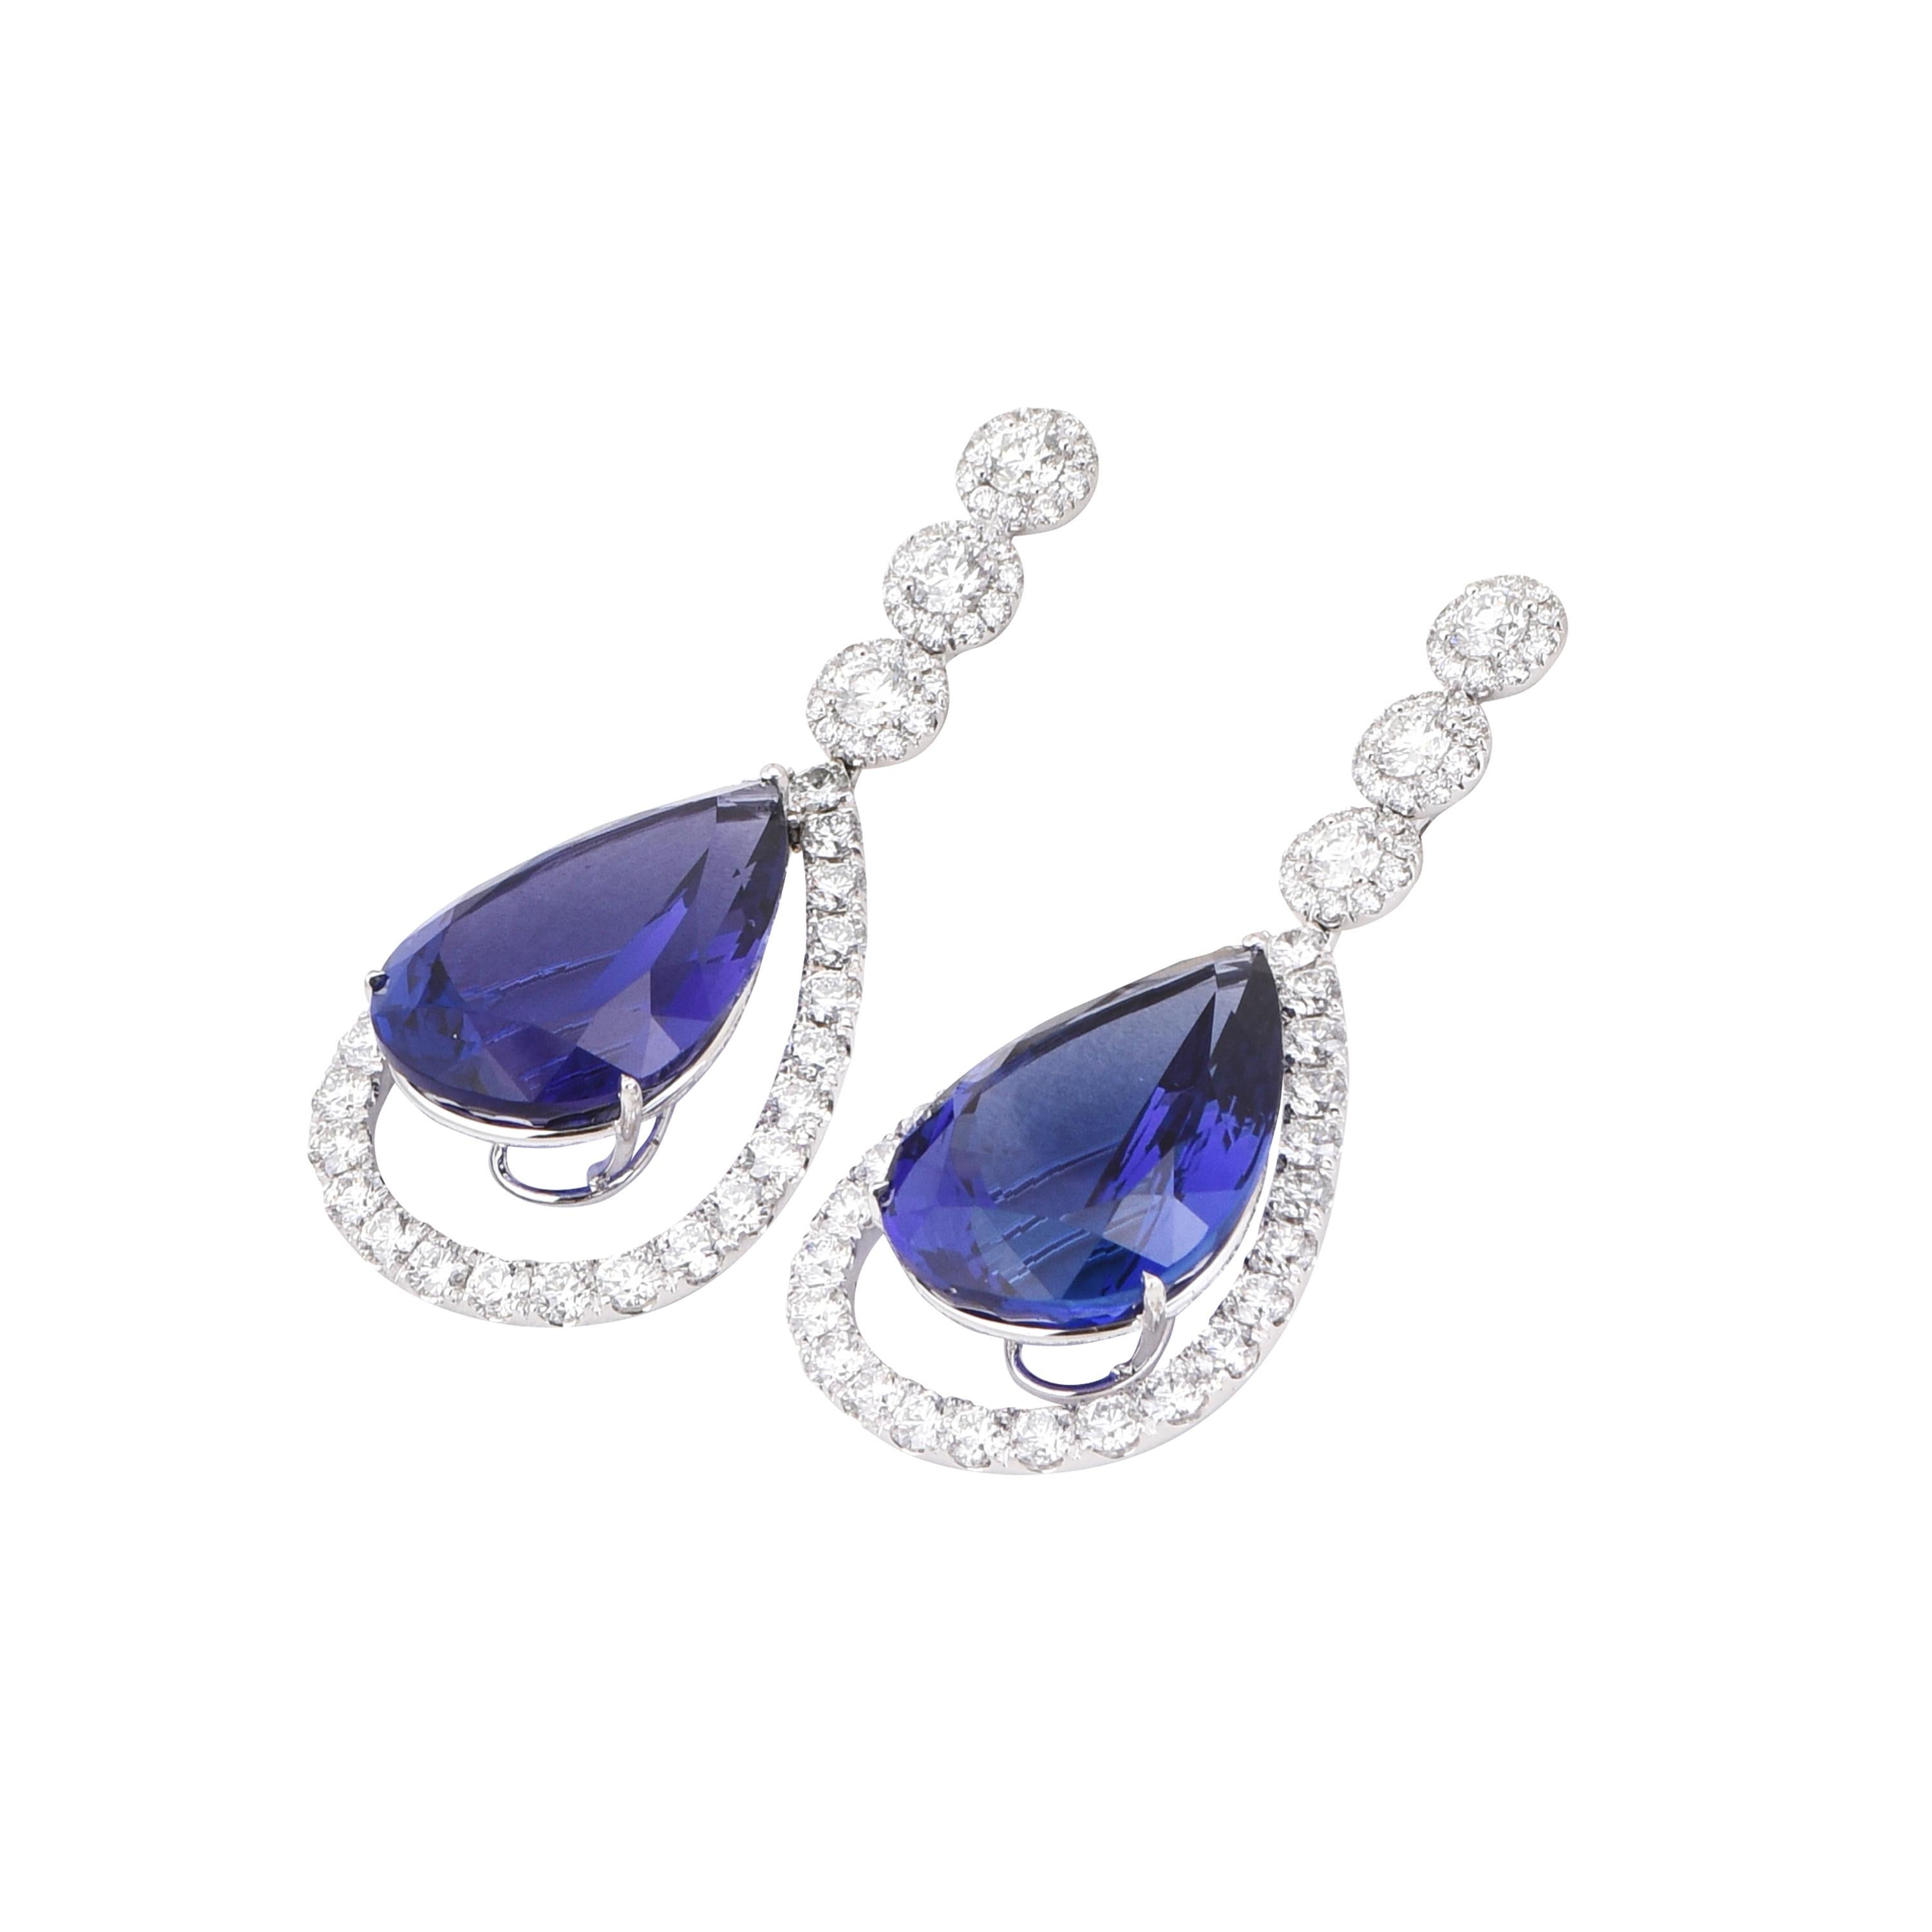 A pair of outstanding 18 karat white gold tanzanite drop earrings from the Ultramarine collection of Laviere. The earrings, certified by IGI, are set with two pear shape tanzanites weighing a total of 70.12 carats and 9.31 carats round brilliant